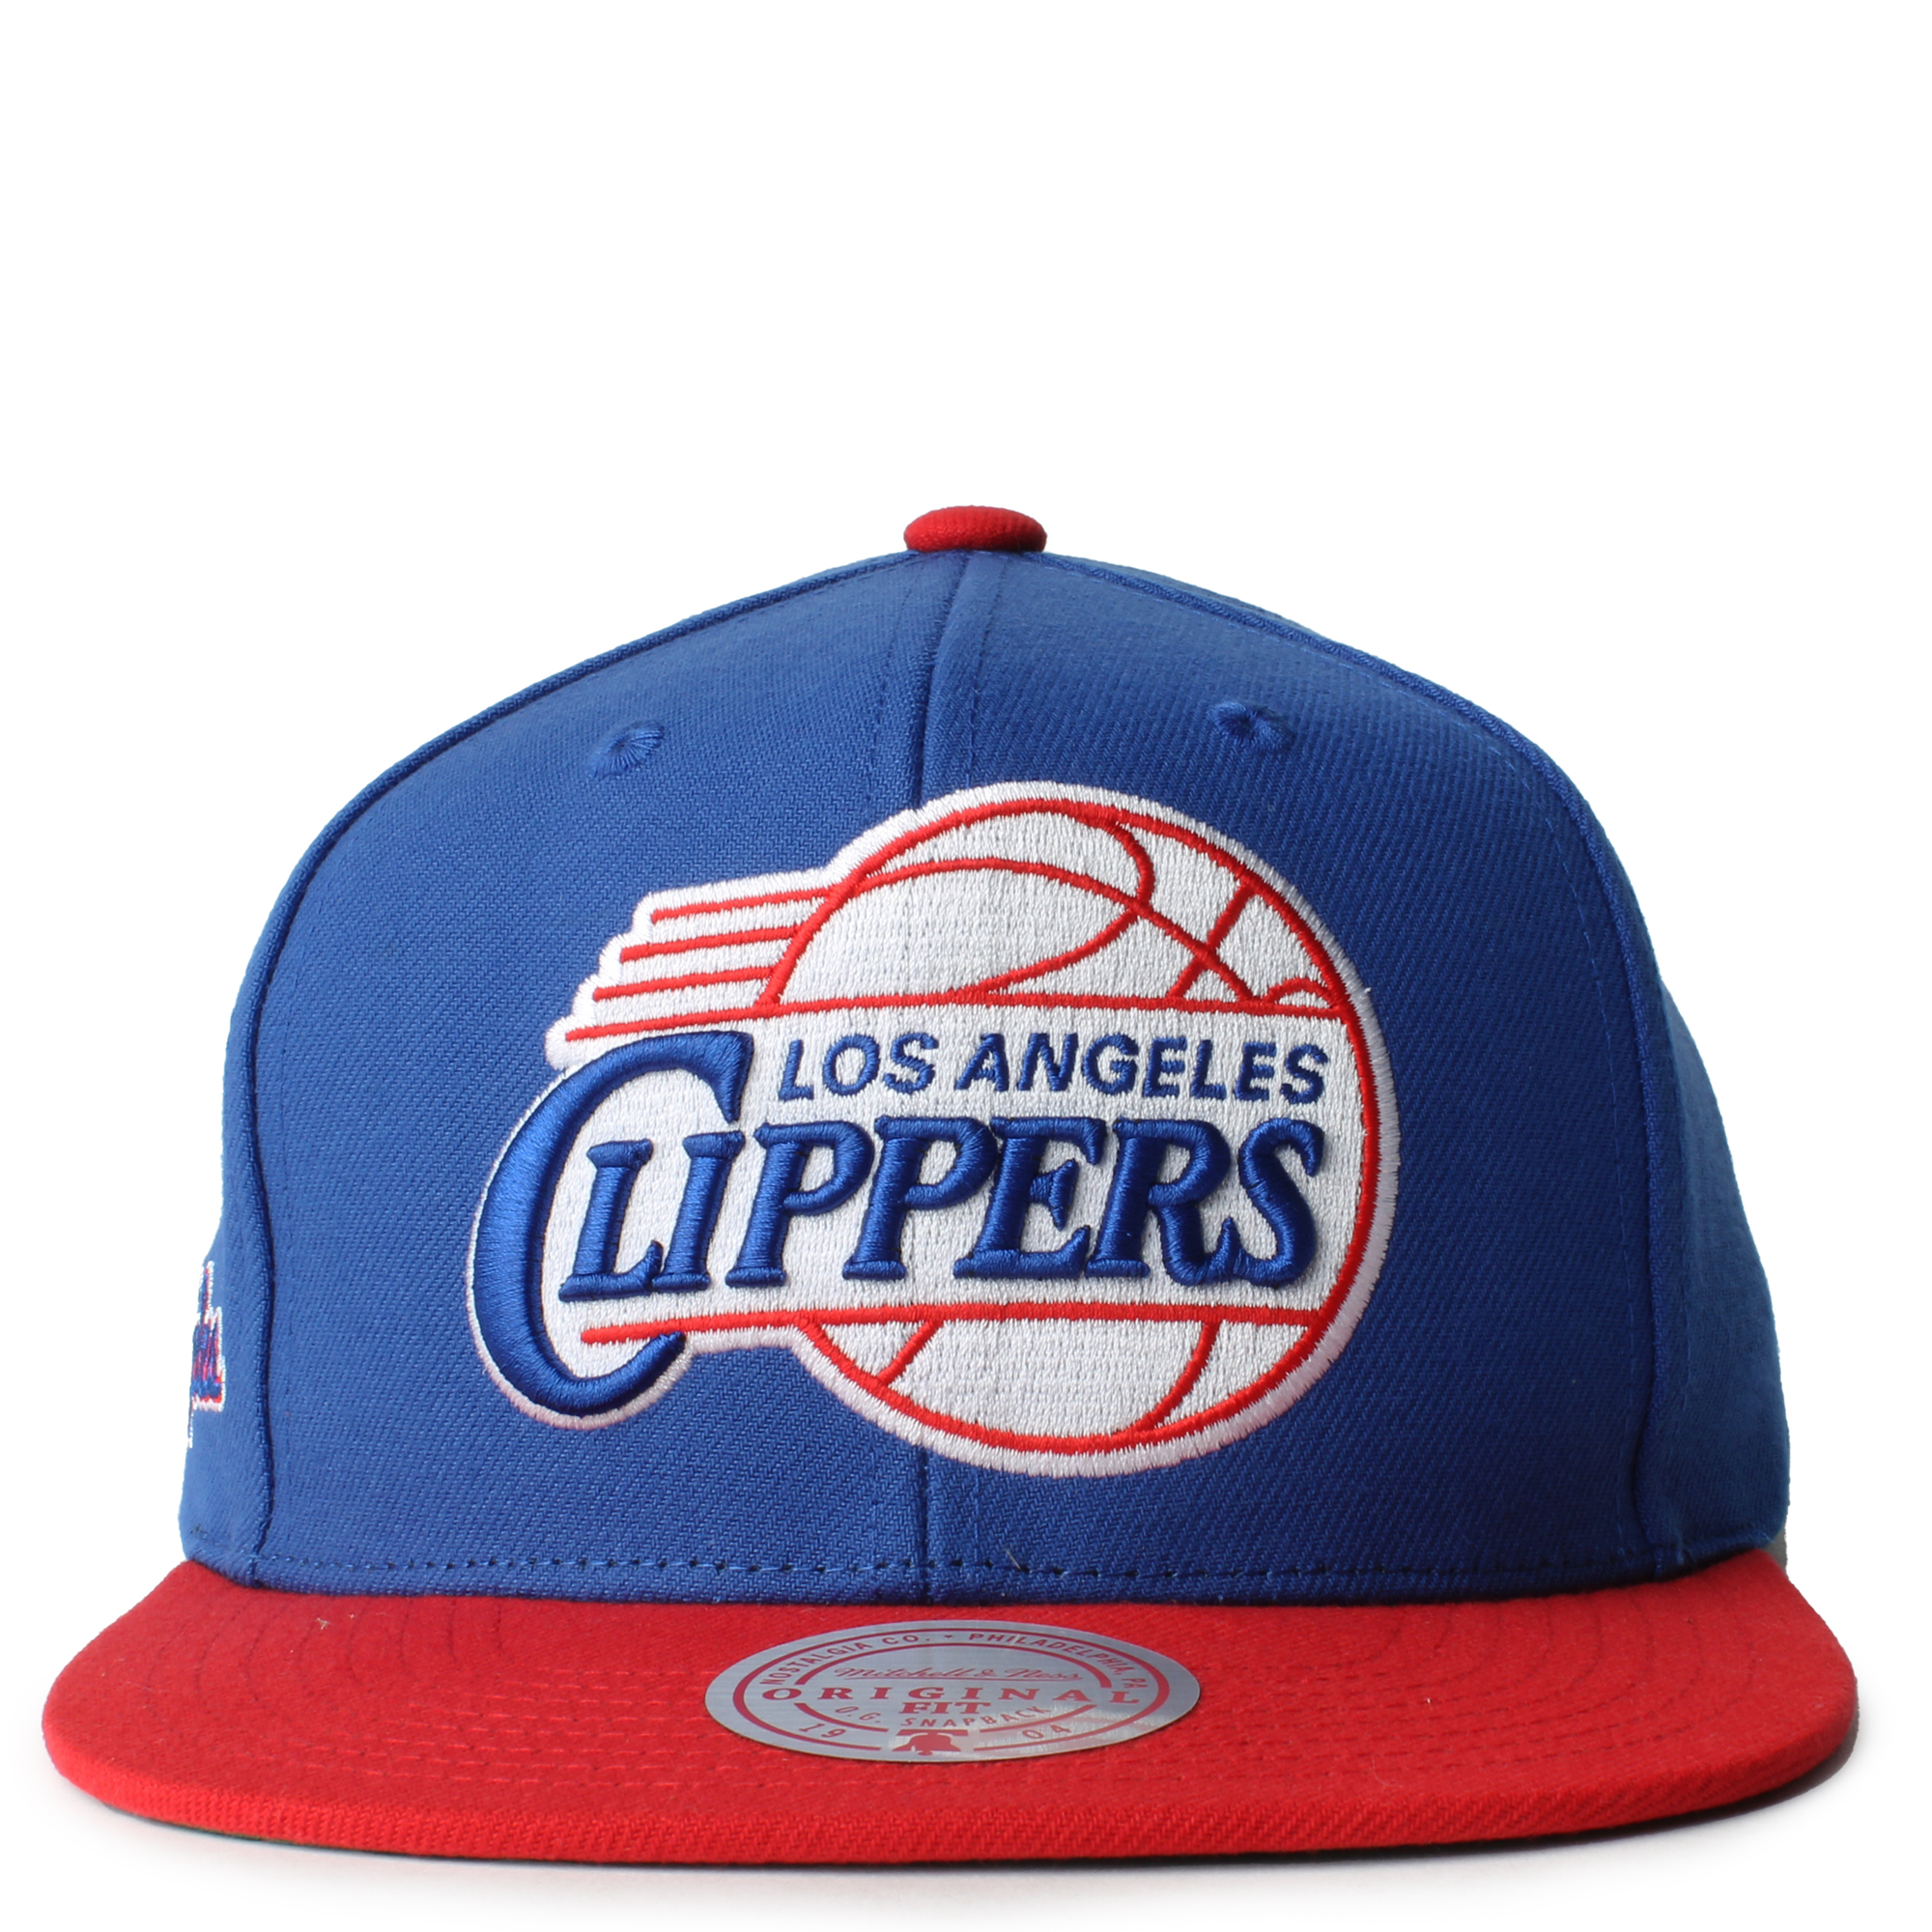 Bullets 2T BP-MESH Royal-Red Fitted Hat by Mitchell and Ness